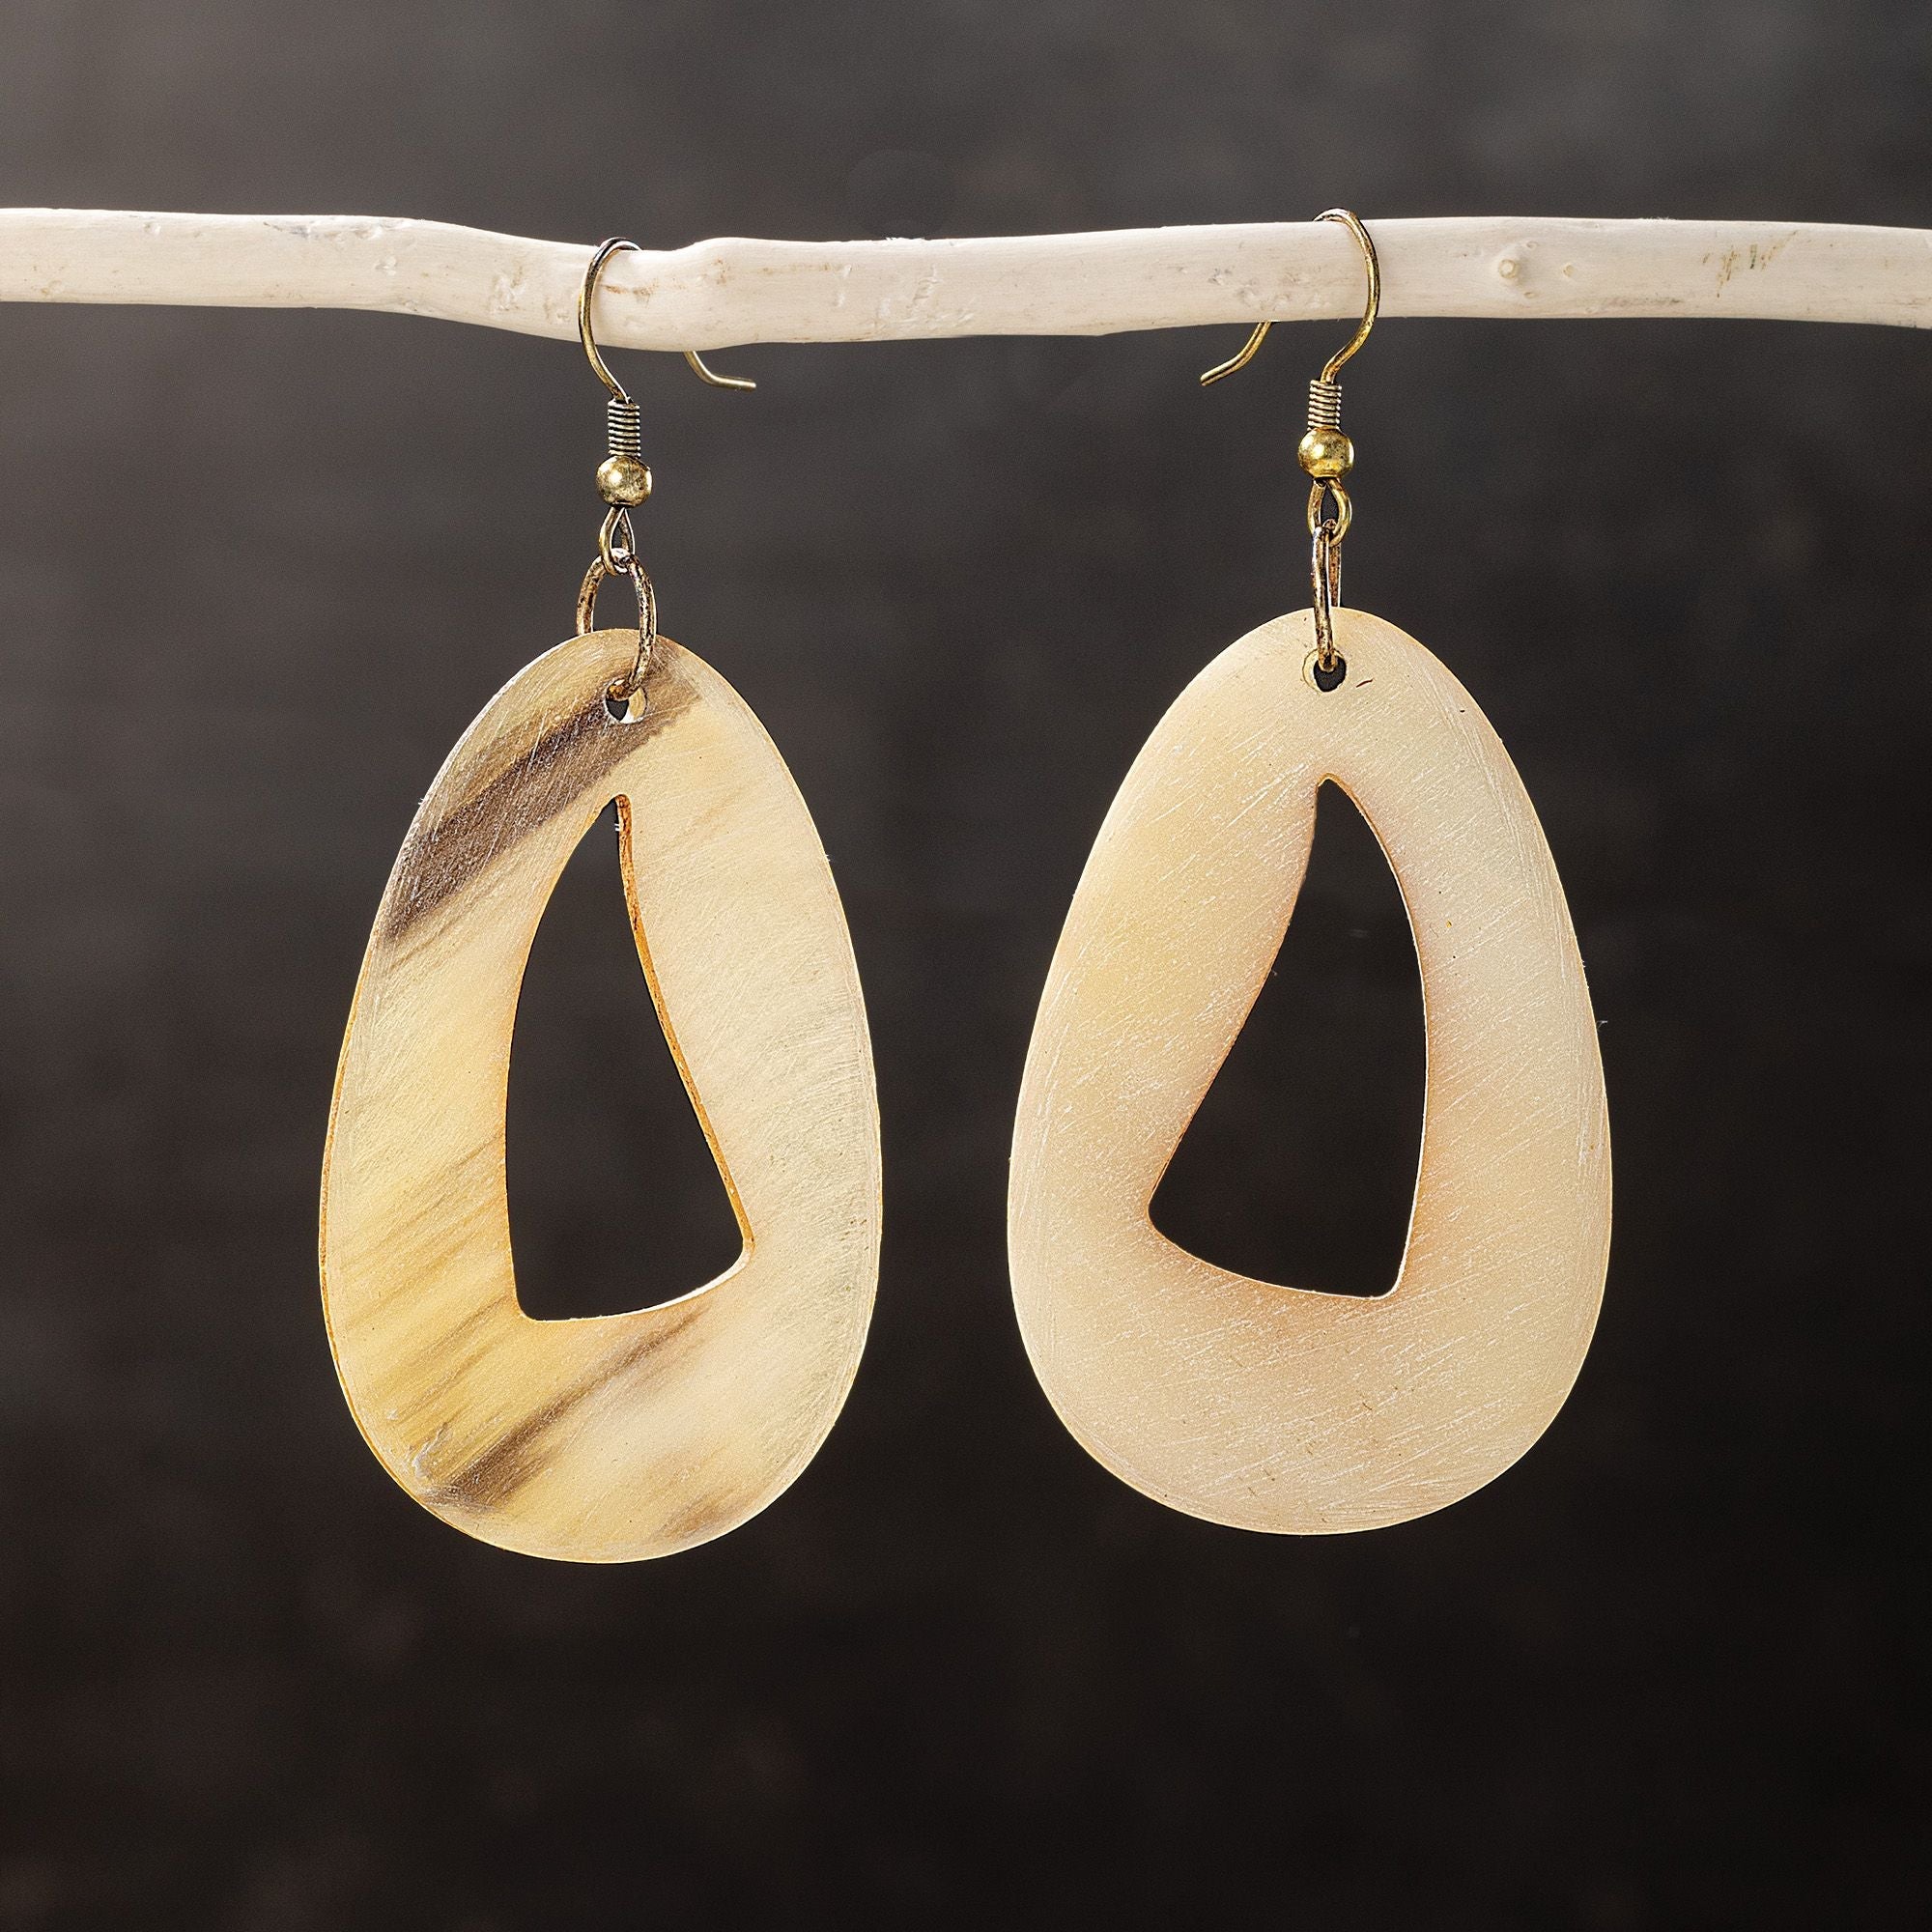 River Bank Upcycled Horn Earrings